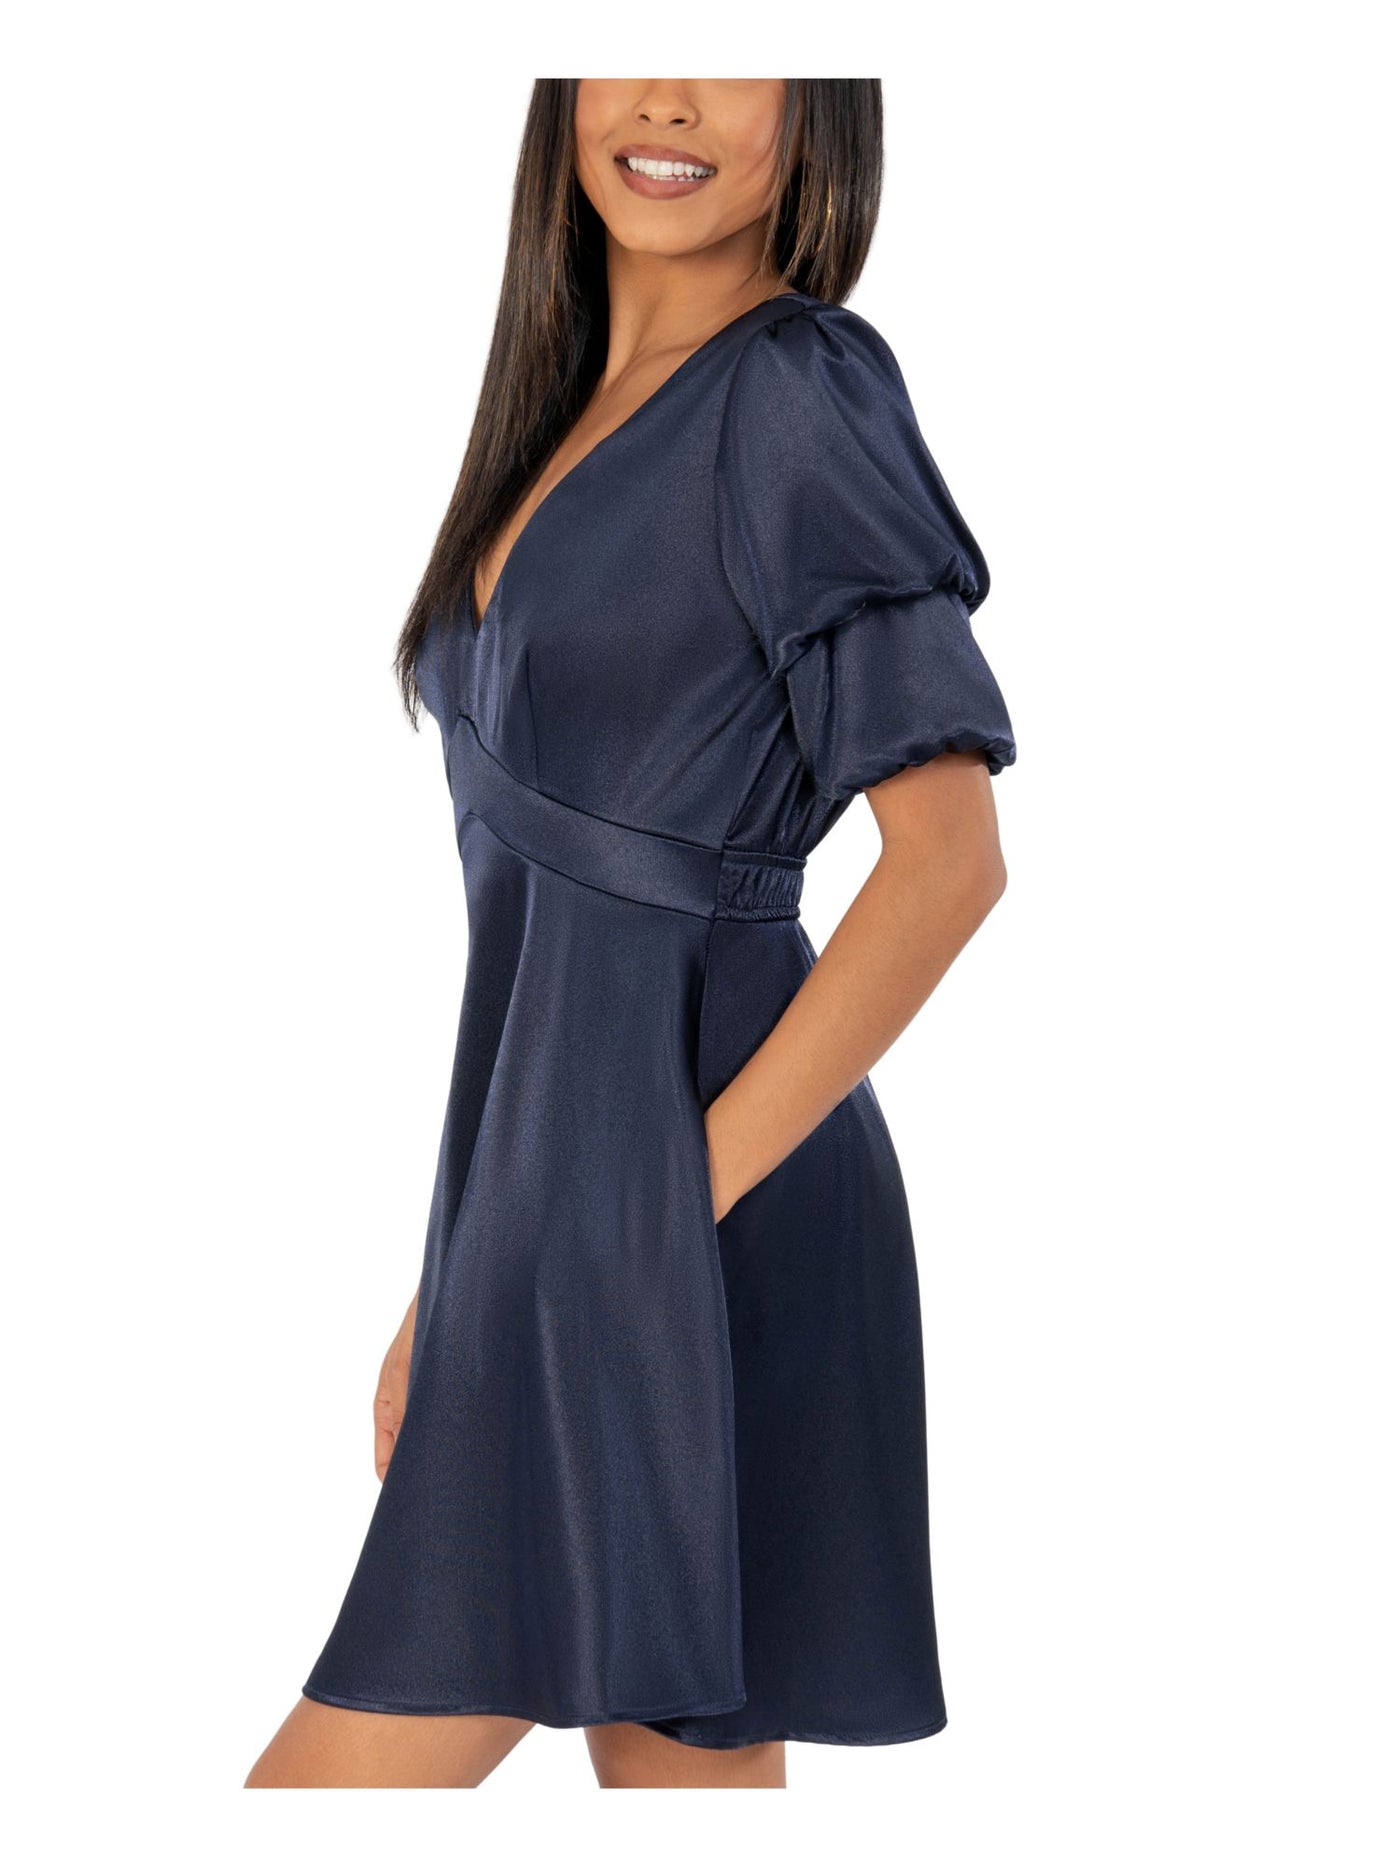 SPEECHLESS Womens Navy Pocketed Darted Satin Short Sleeve V Neck Short Party Fit + Flare Dress Juniors 3